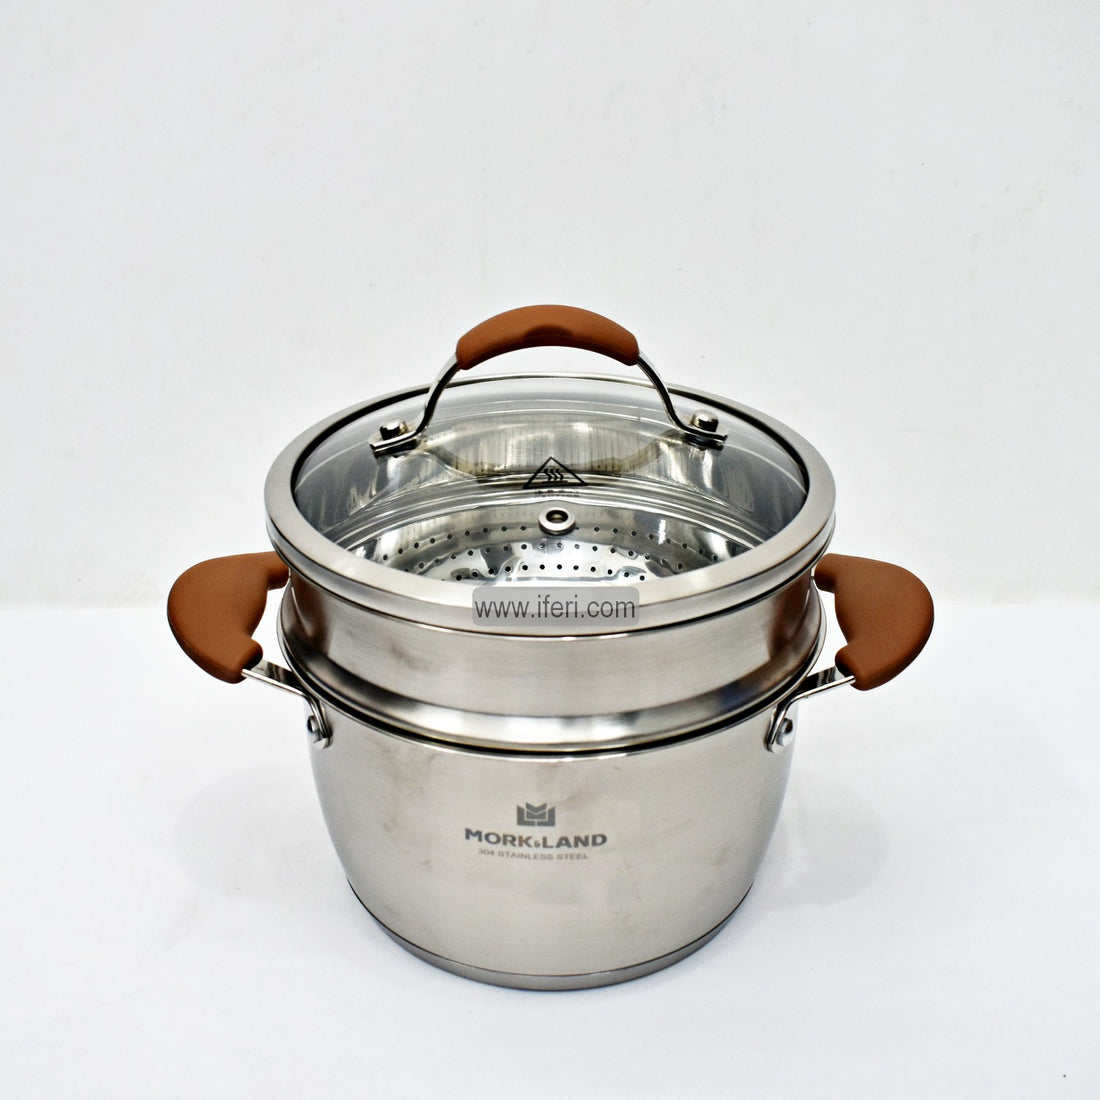 20cm Stainless Steel Cookware with Steamer RY06348